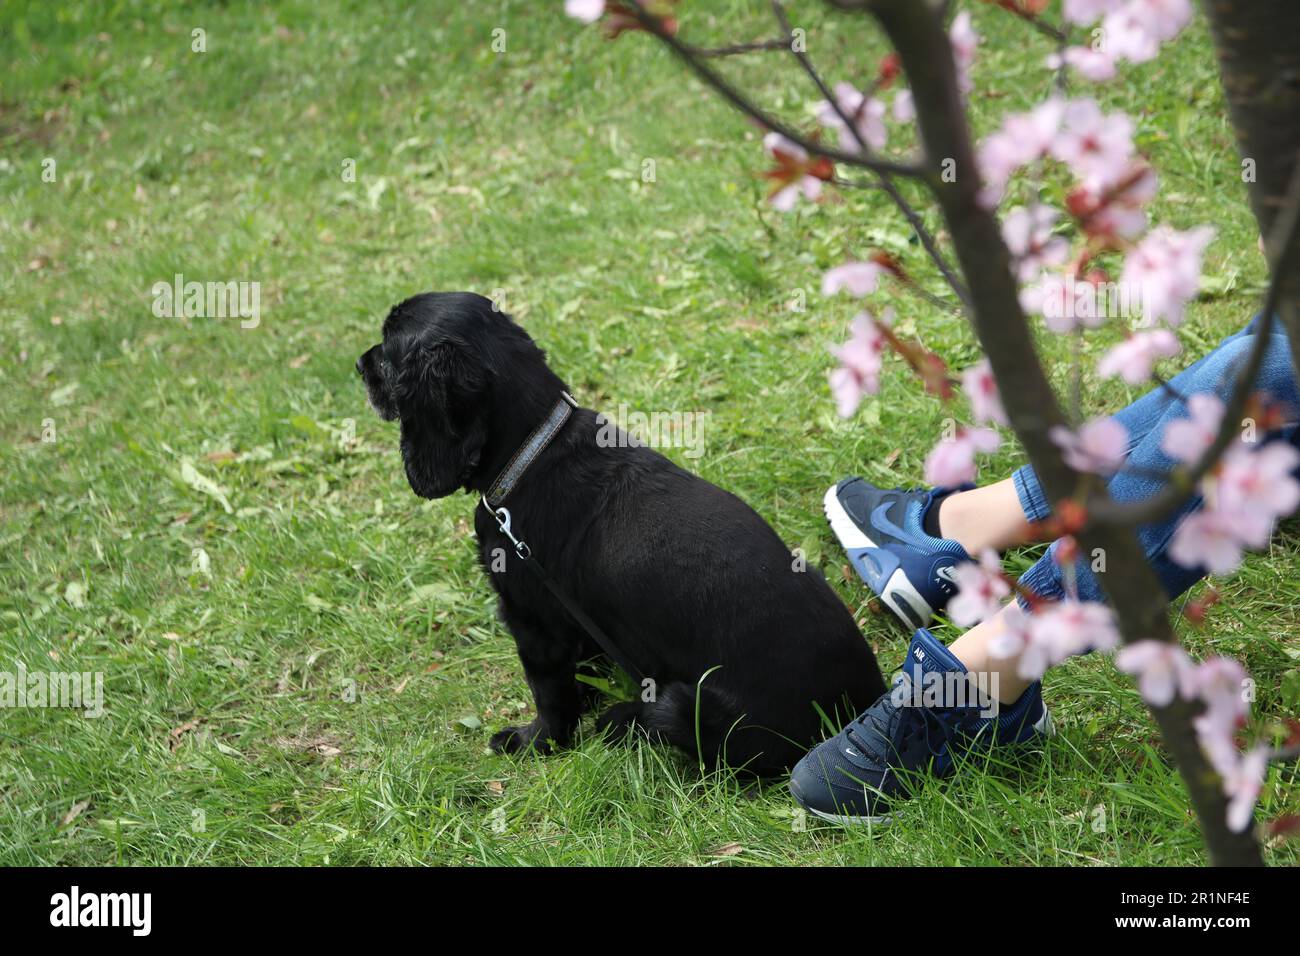 photo of a dog on a walk in the park Stock Photo